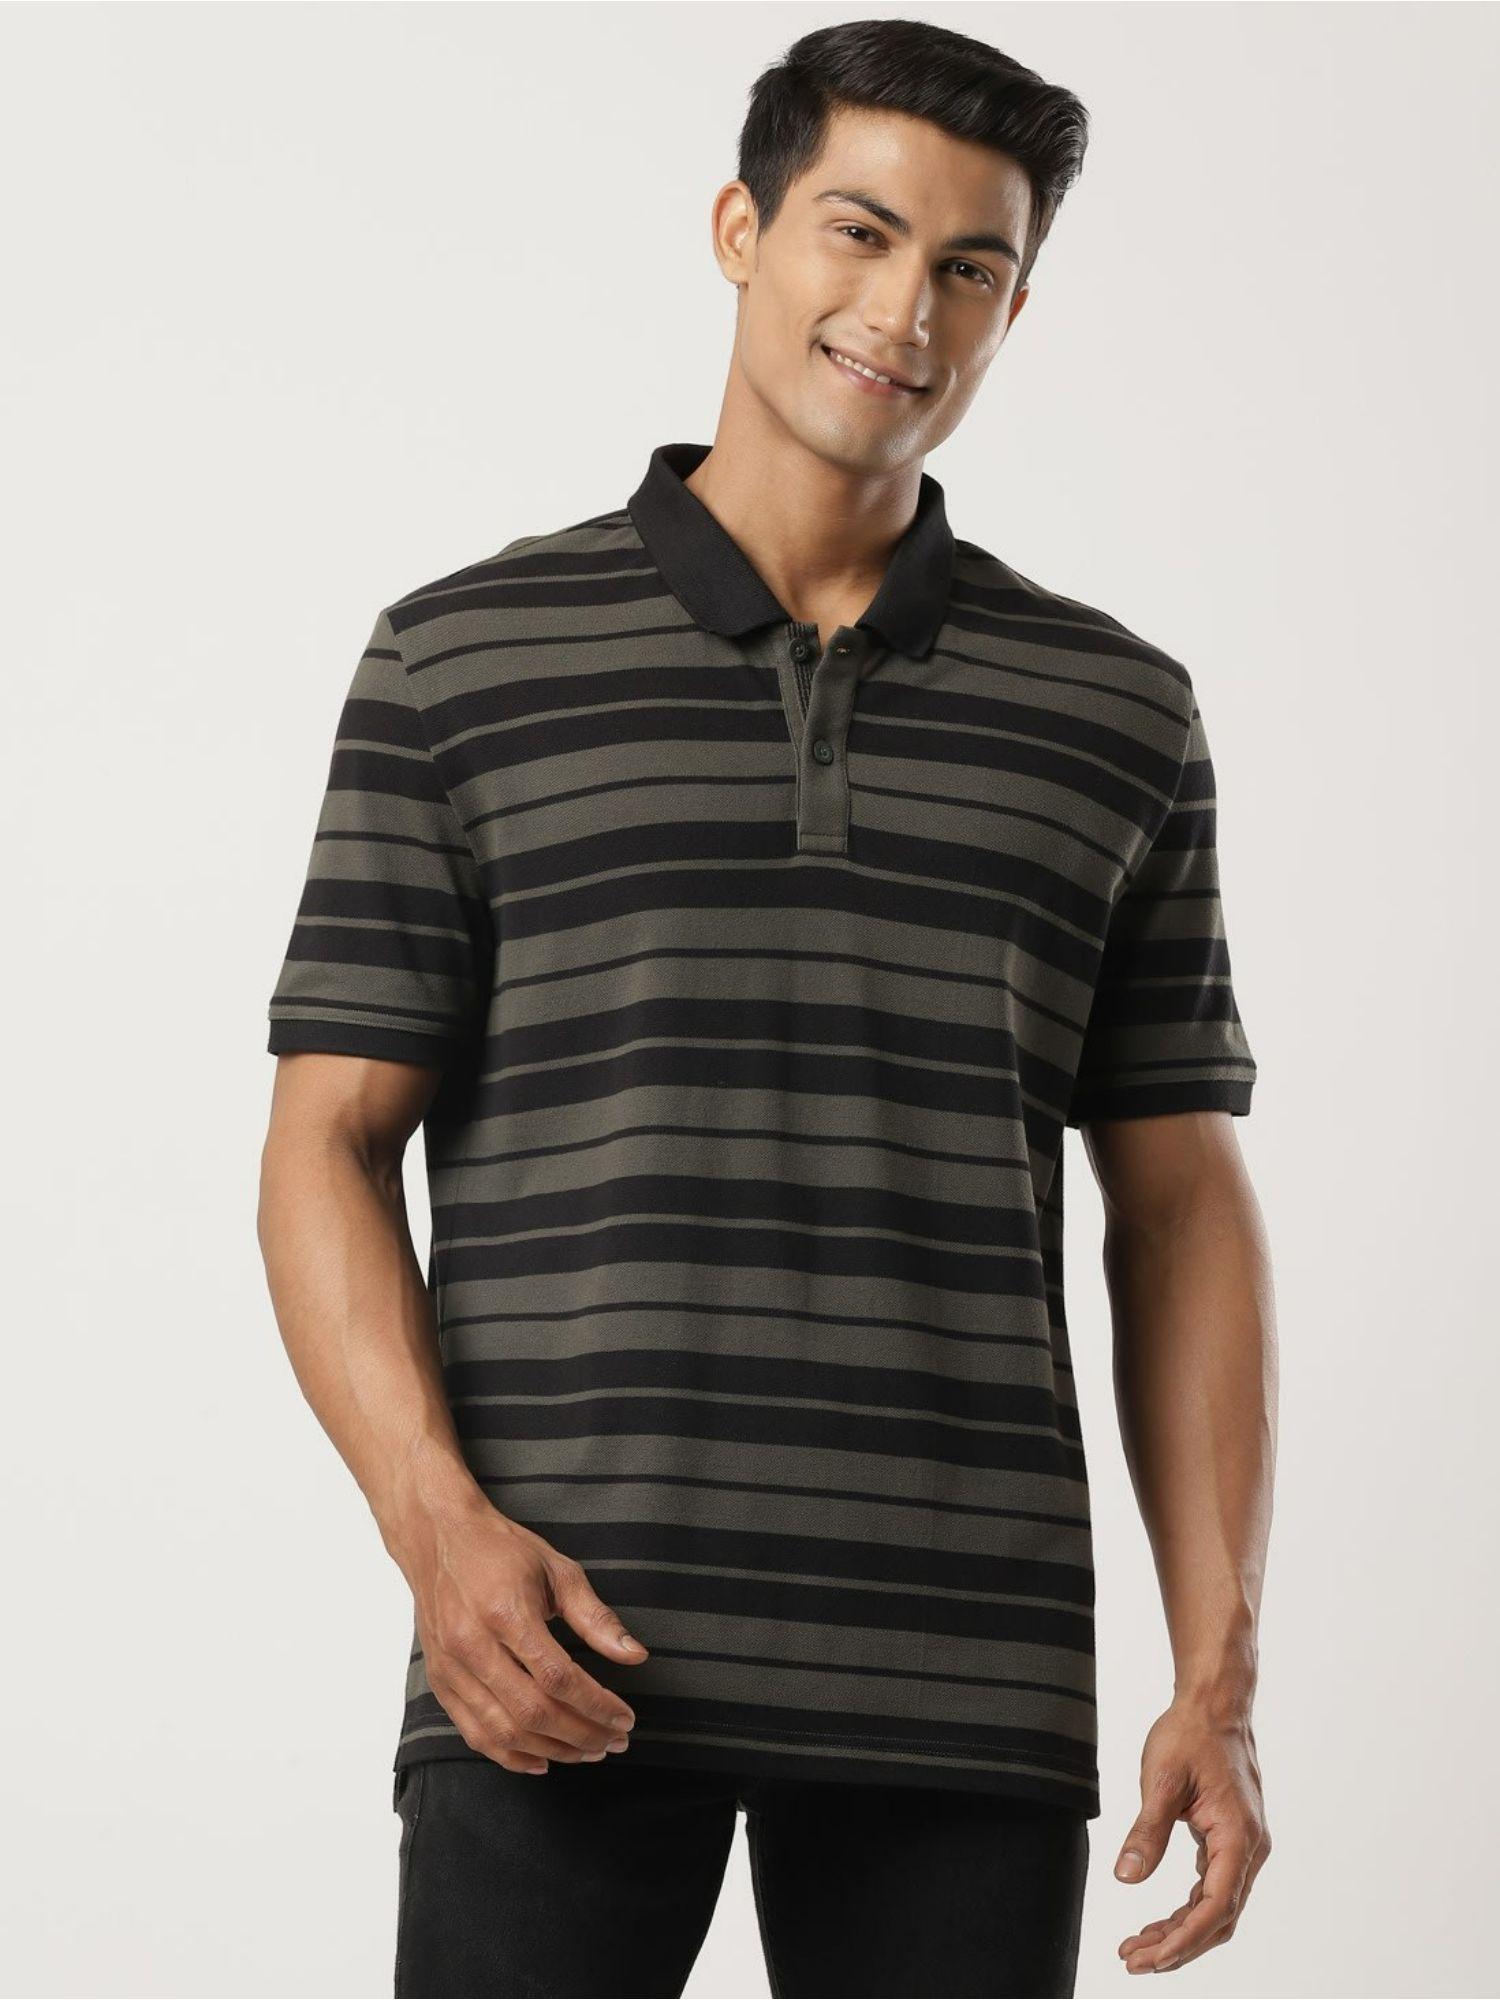 us93 mens super combed cotton rich striped half sleeve polo t-shirt black & deep olive